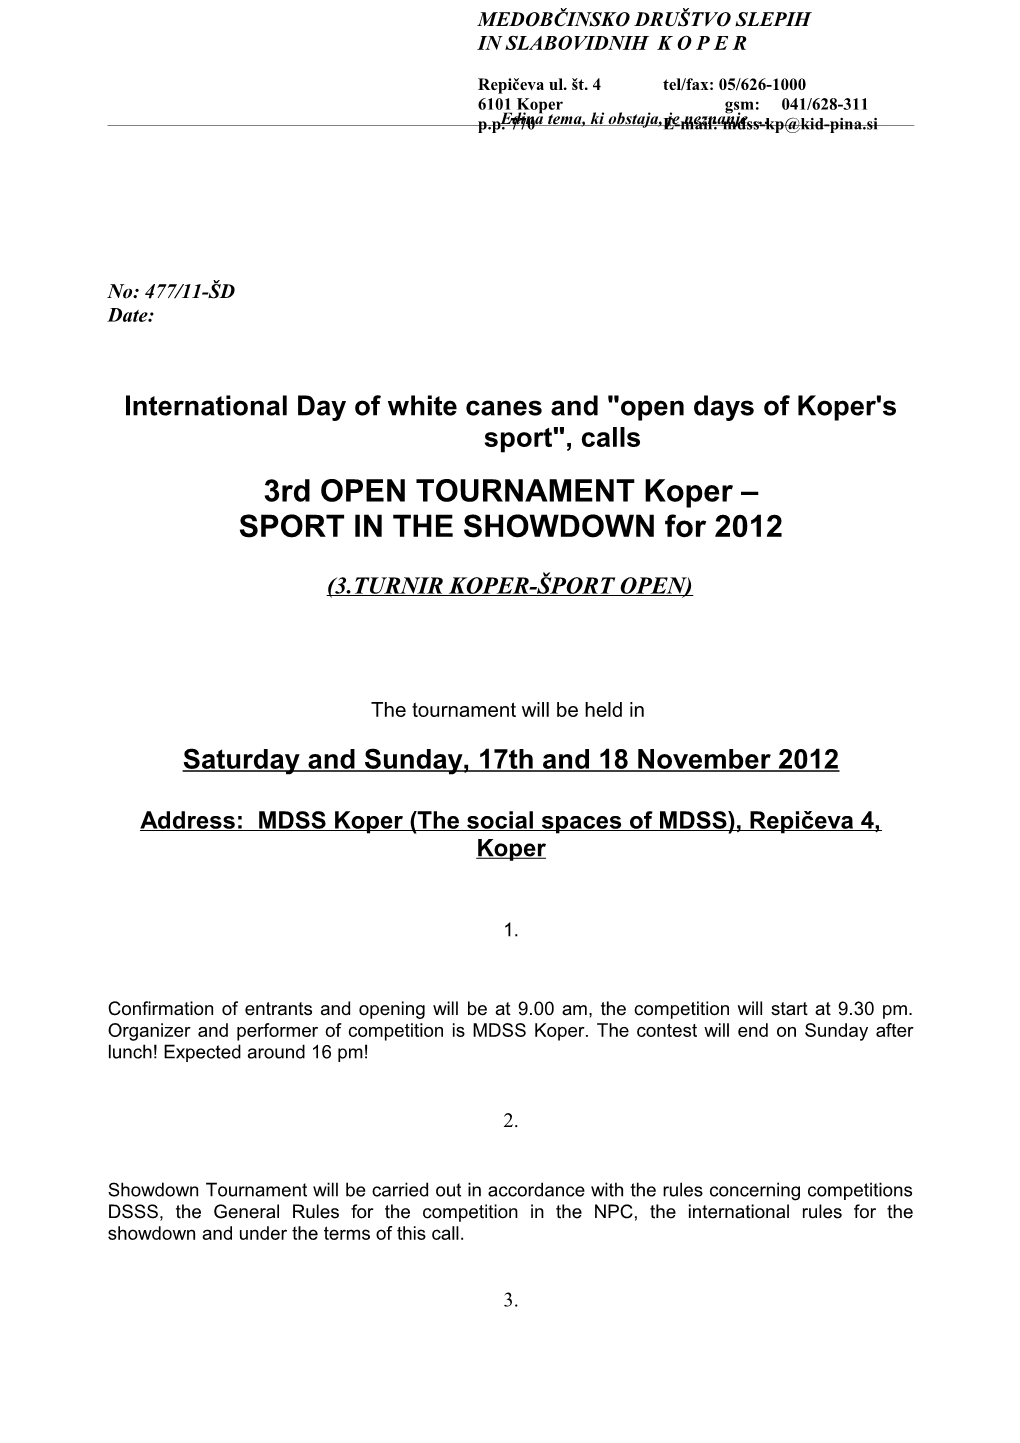 International Day of White Canes and Open Days of Koper's Sport , Calls